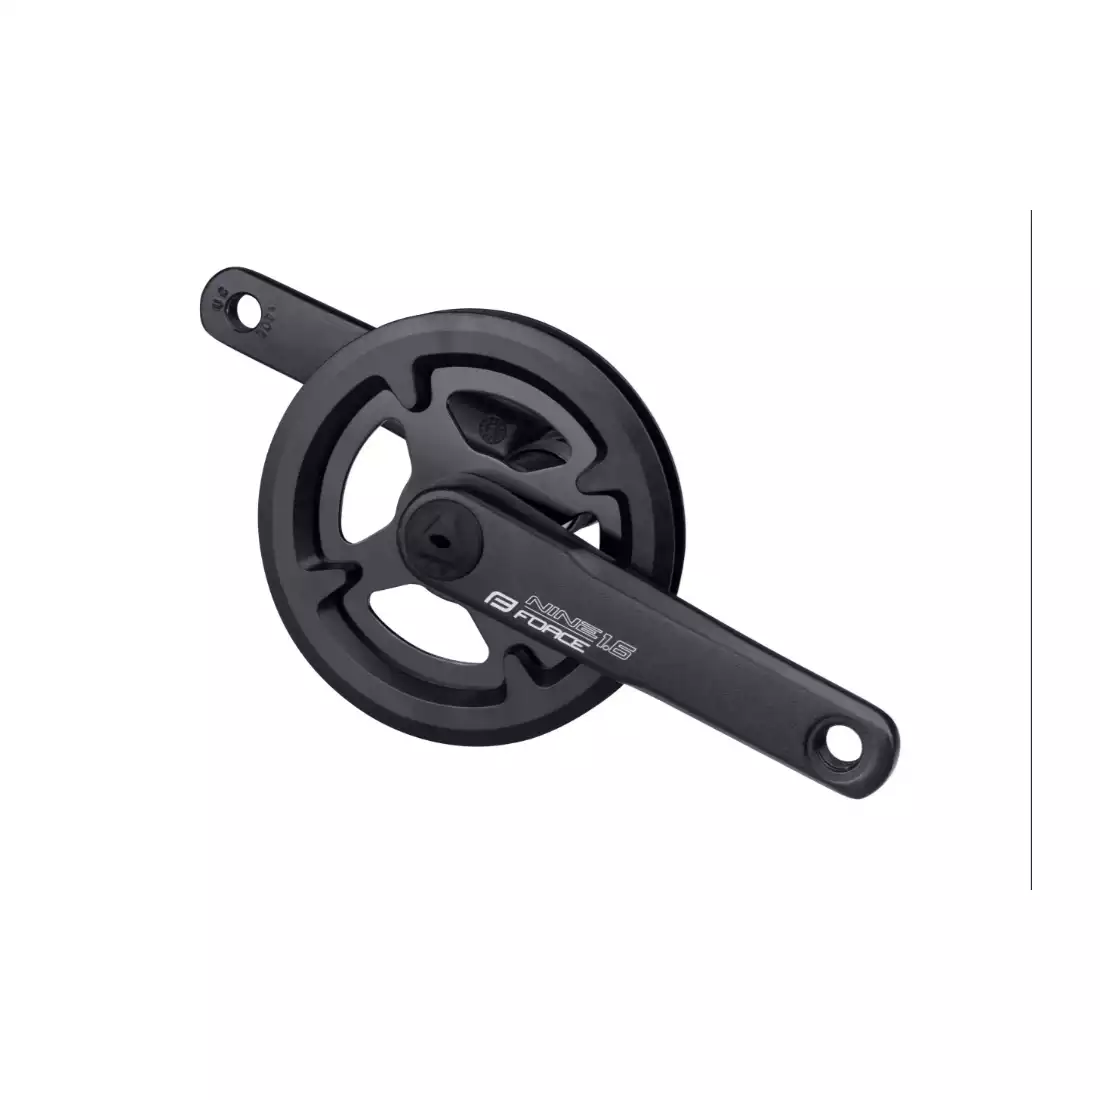 FORCE NINE 1.6 bicycle crank with guard 32T/152 mm aluminum black